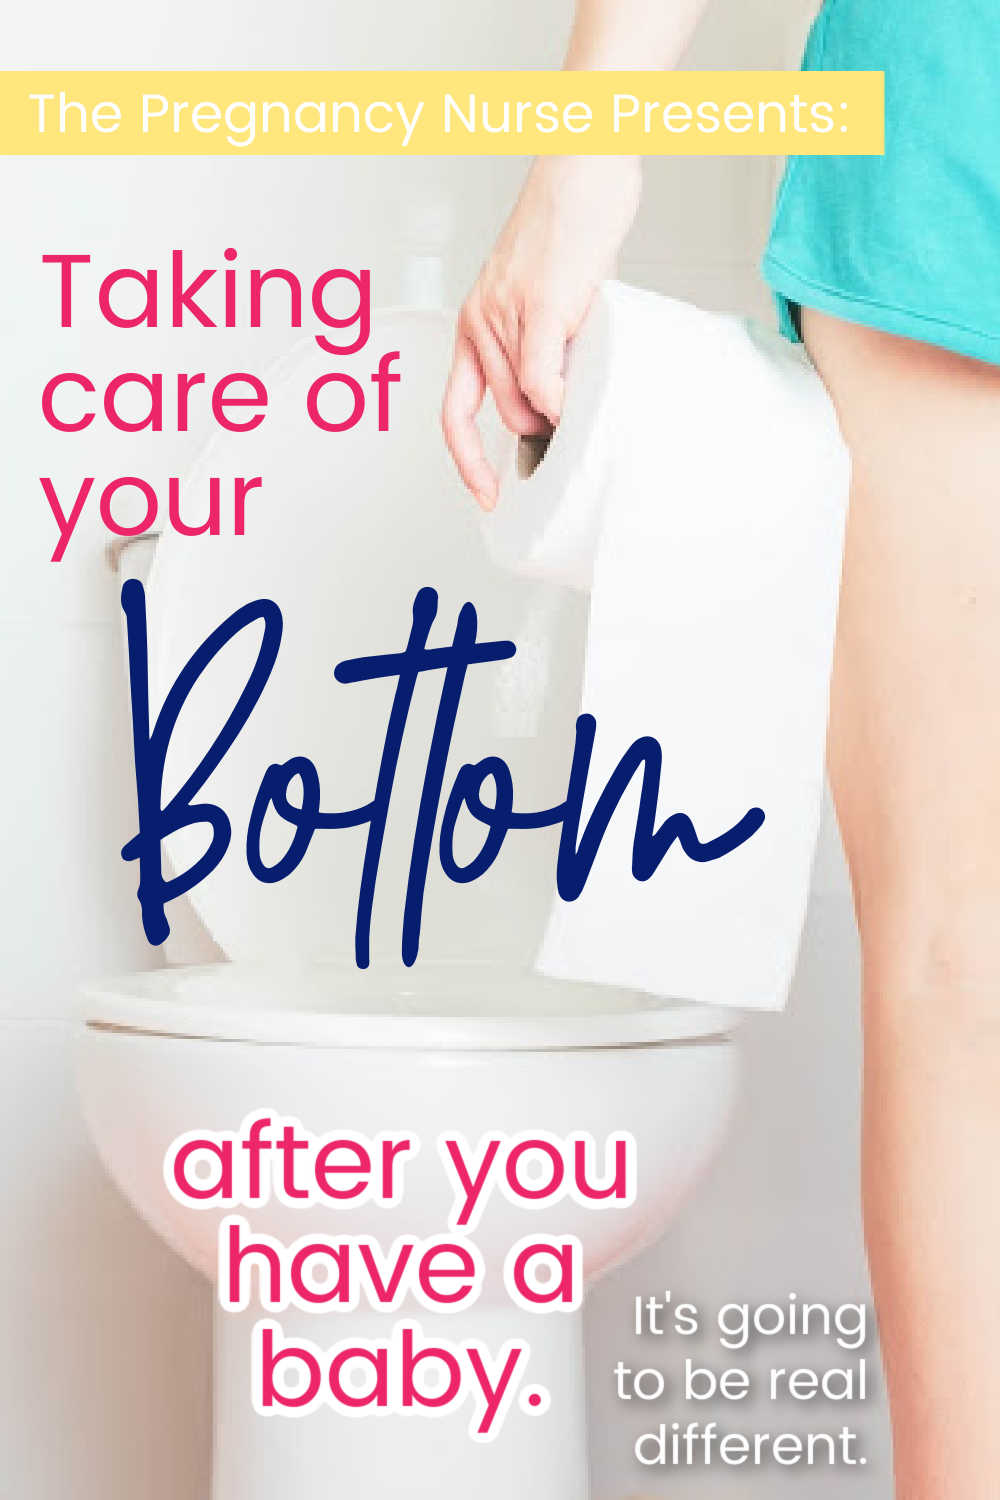 How will you take care of your bottom and perineum (the area between your urethra and your rectum)? After you have a baby you're going to take care of this area in a whole new way. I can show you what to expect so it's not as foreign after the baby is born.